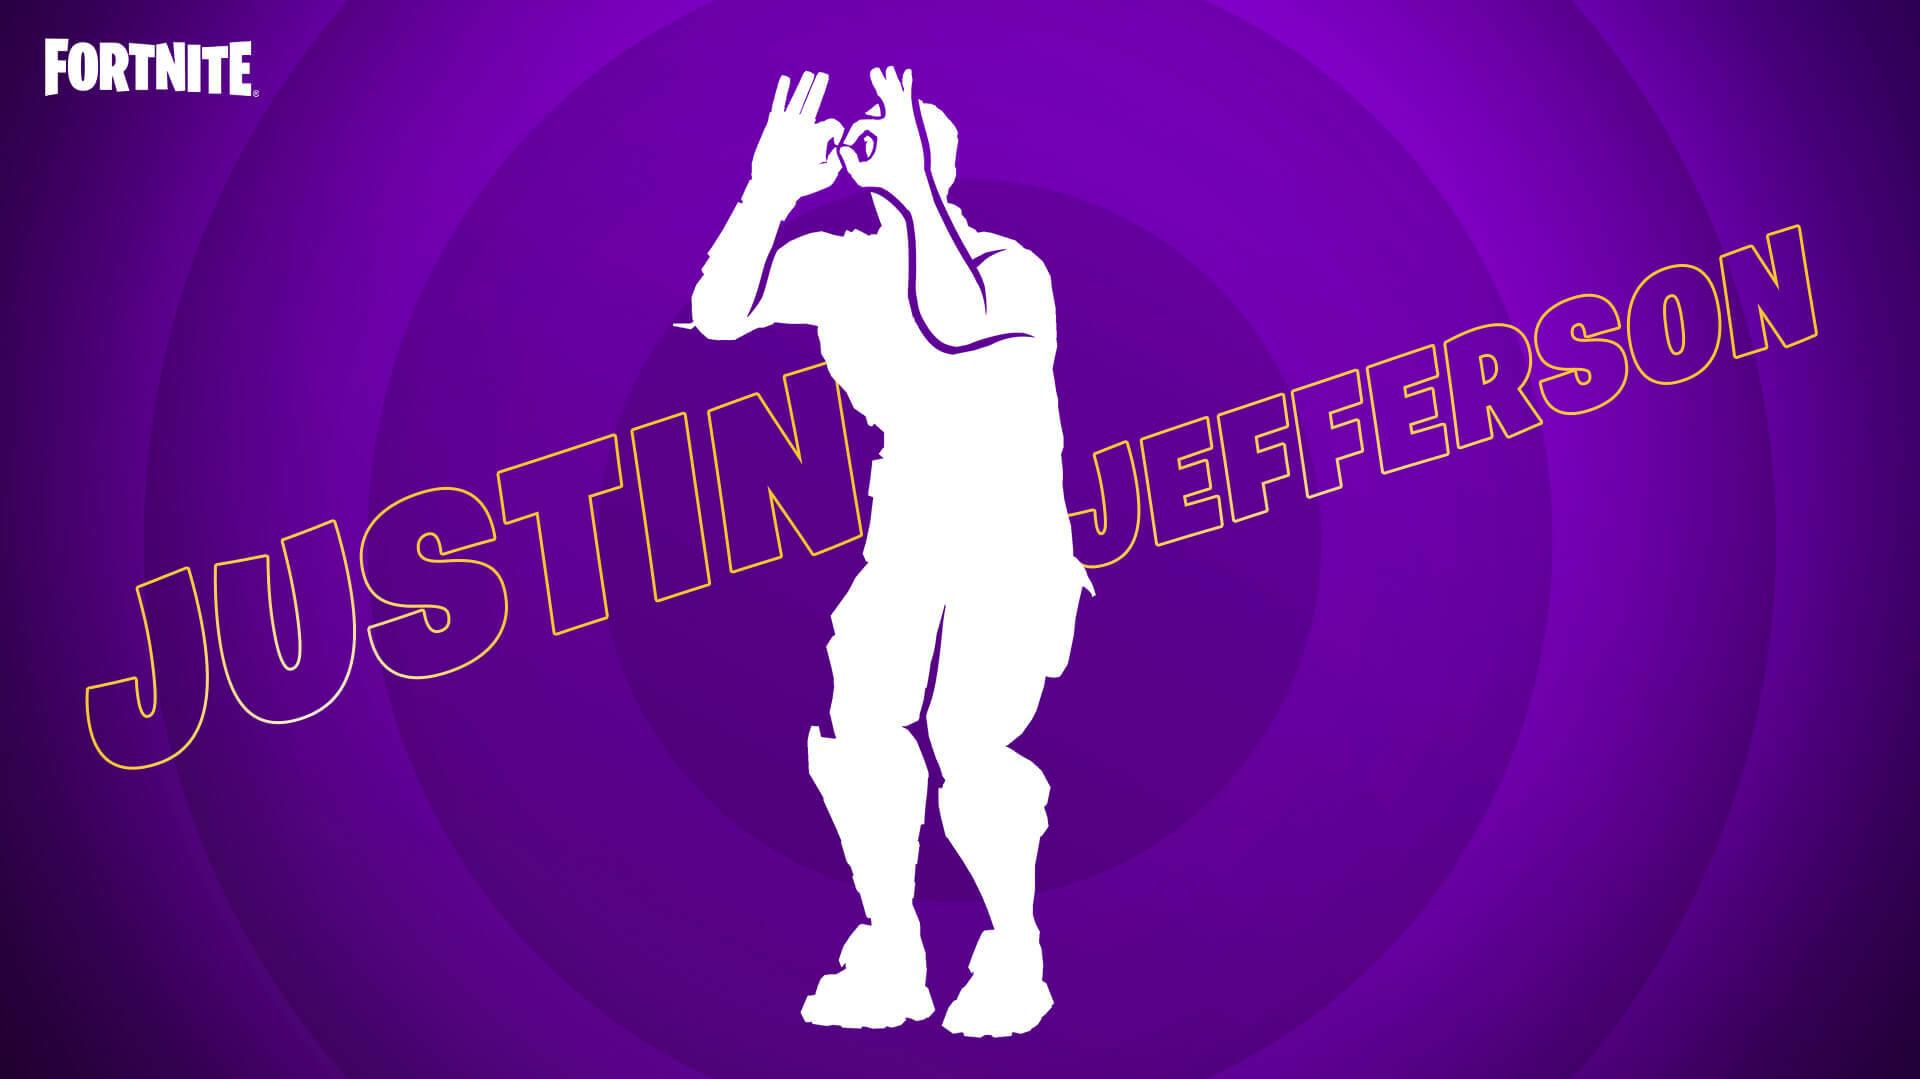 NFL Star Justin Jefferson Is Getting His Own Fortnite Emote GameSpot